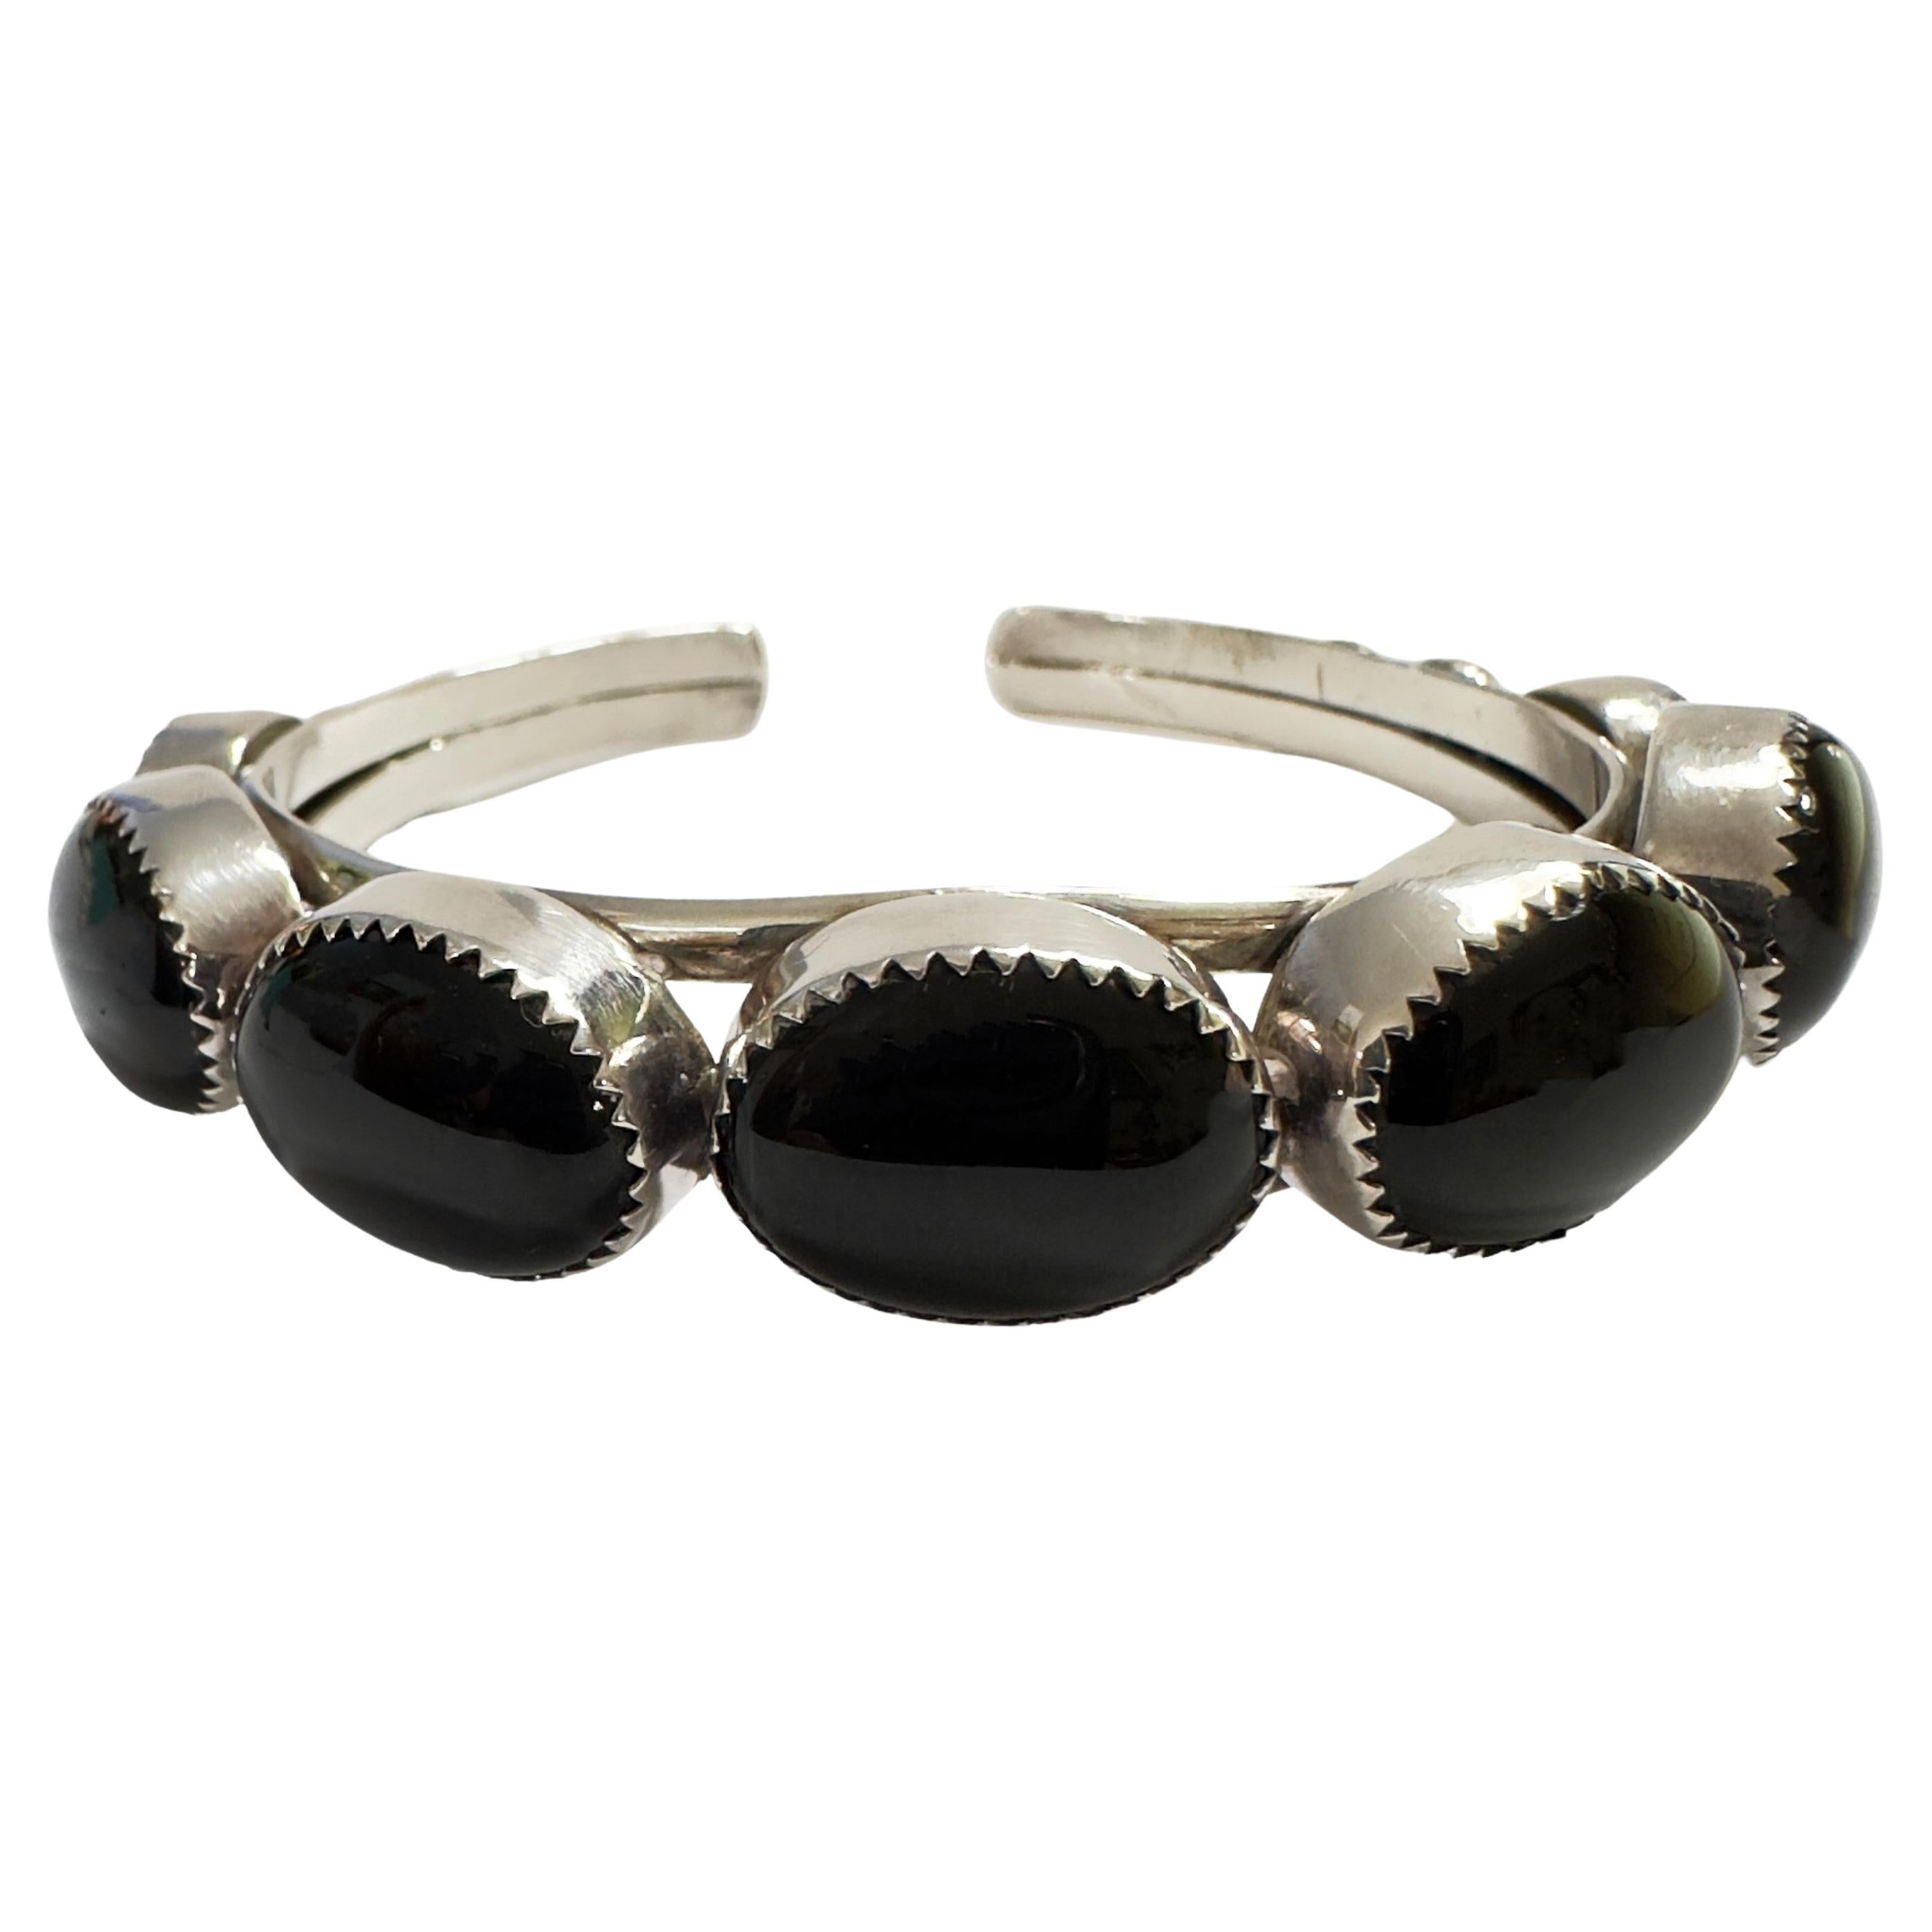 Sterling Silver and Black Onyx Cuff Bracelet Stamped C. Little For Sale